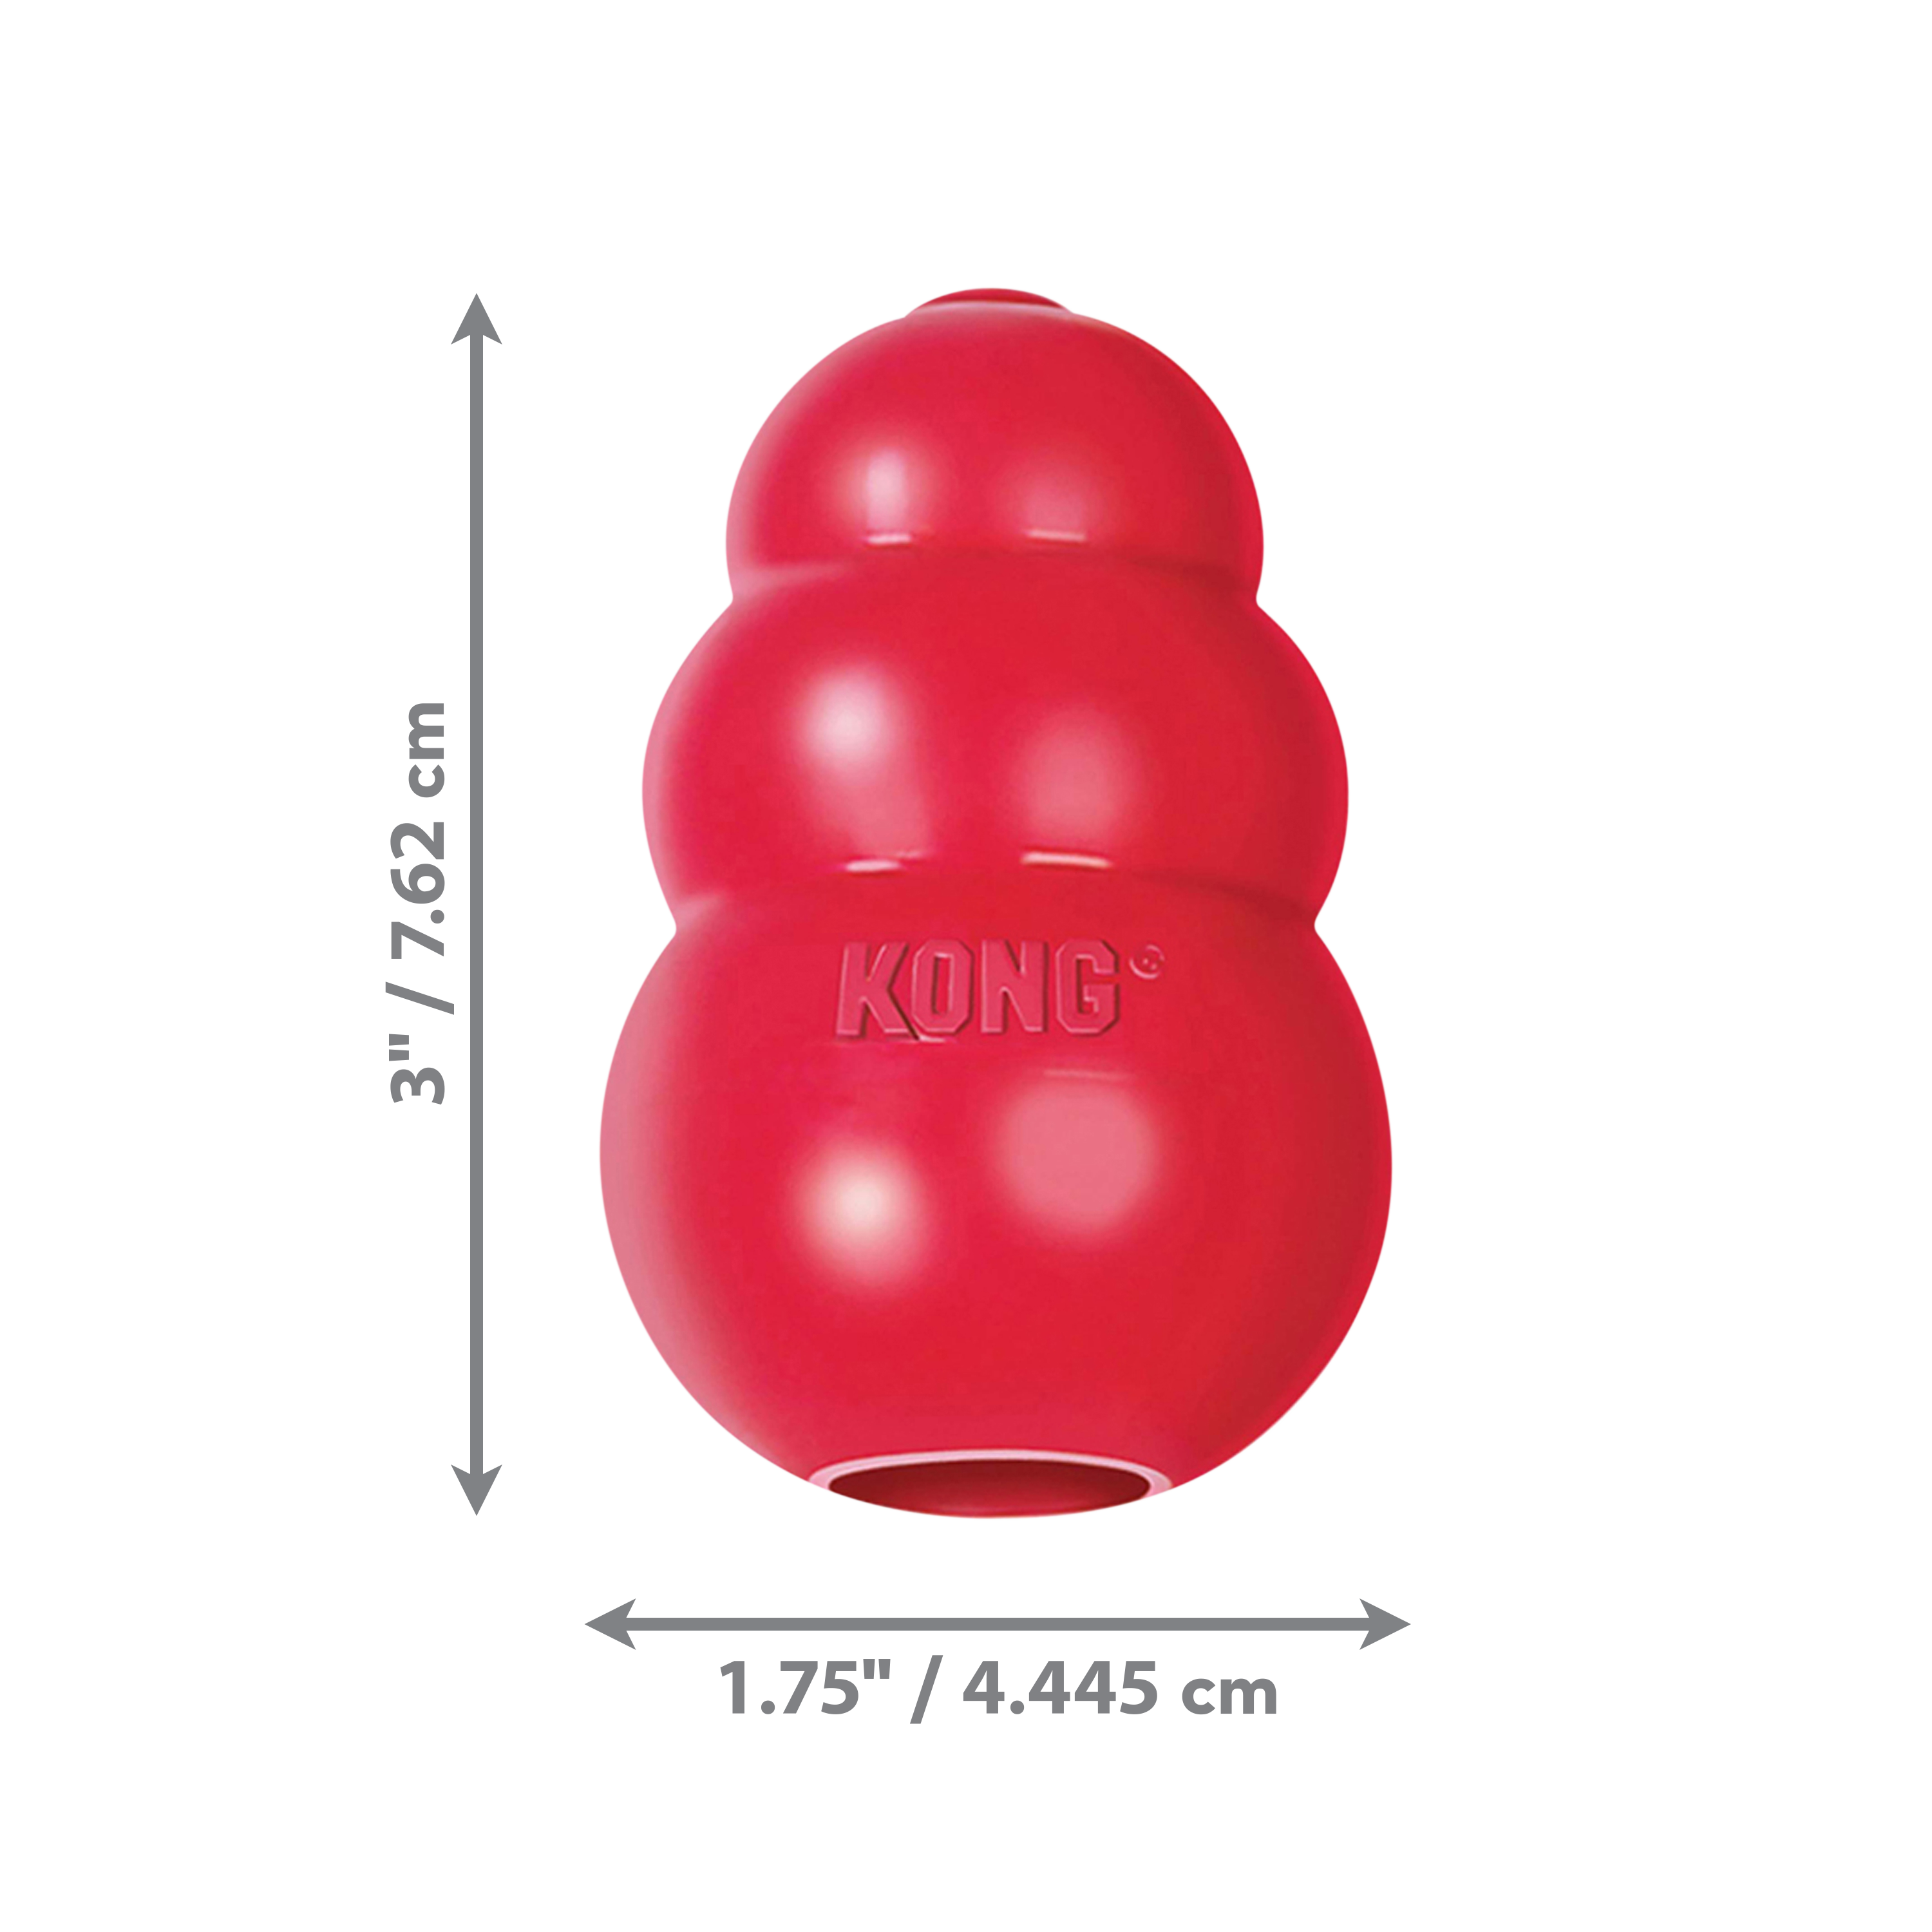 KONG Classic dimoffpack product image